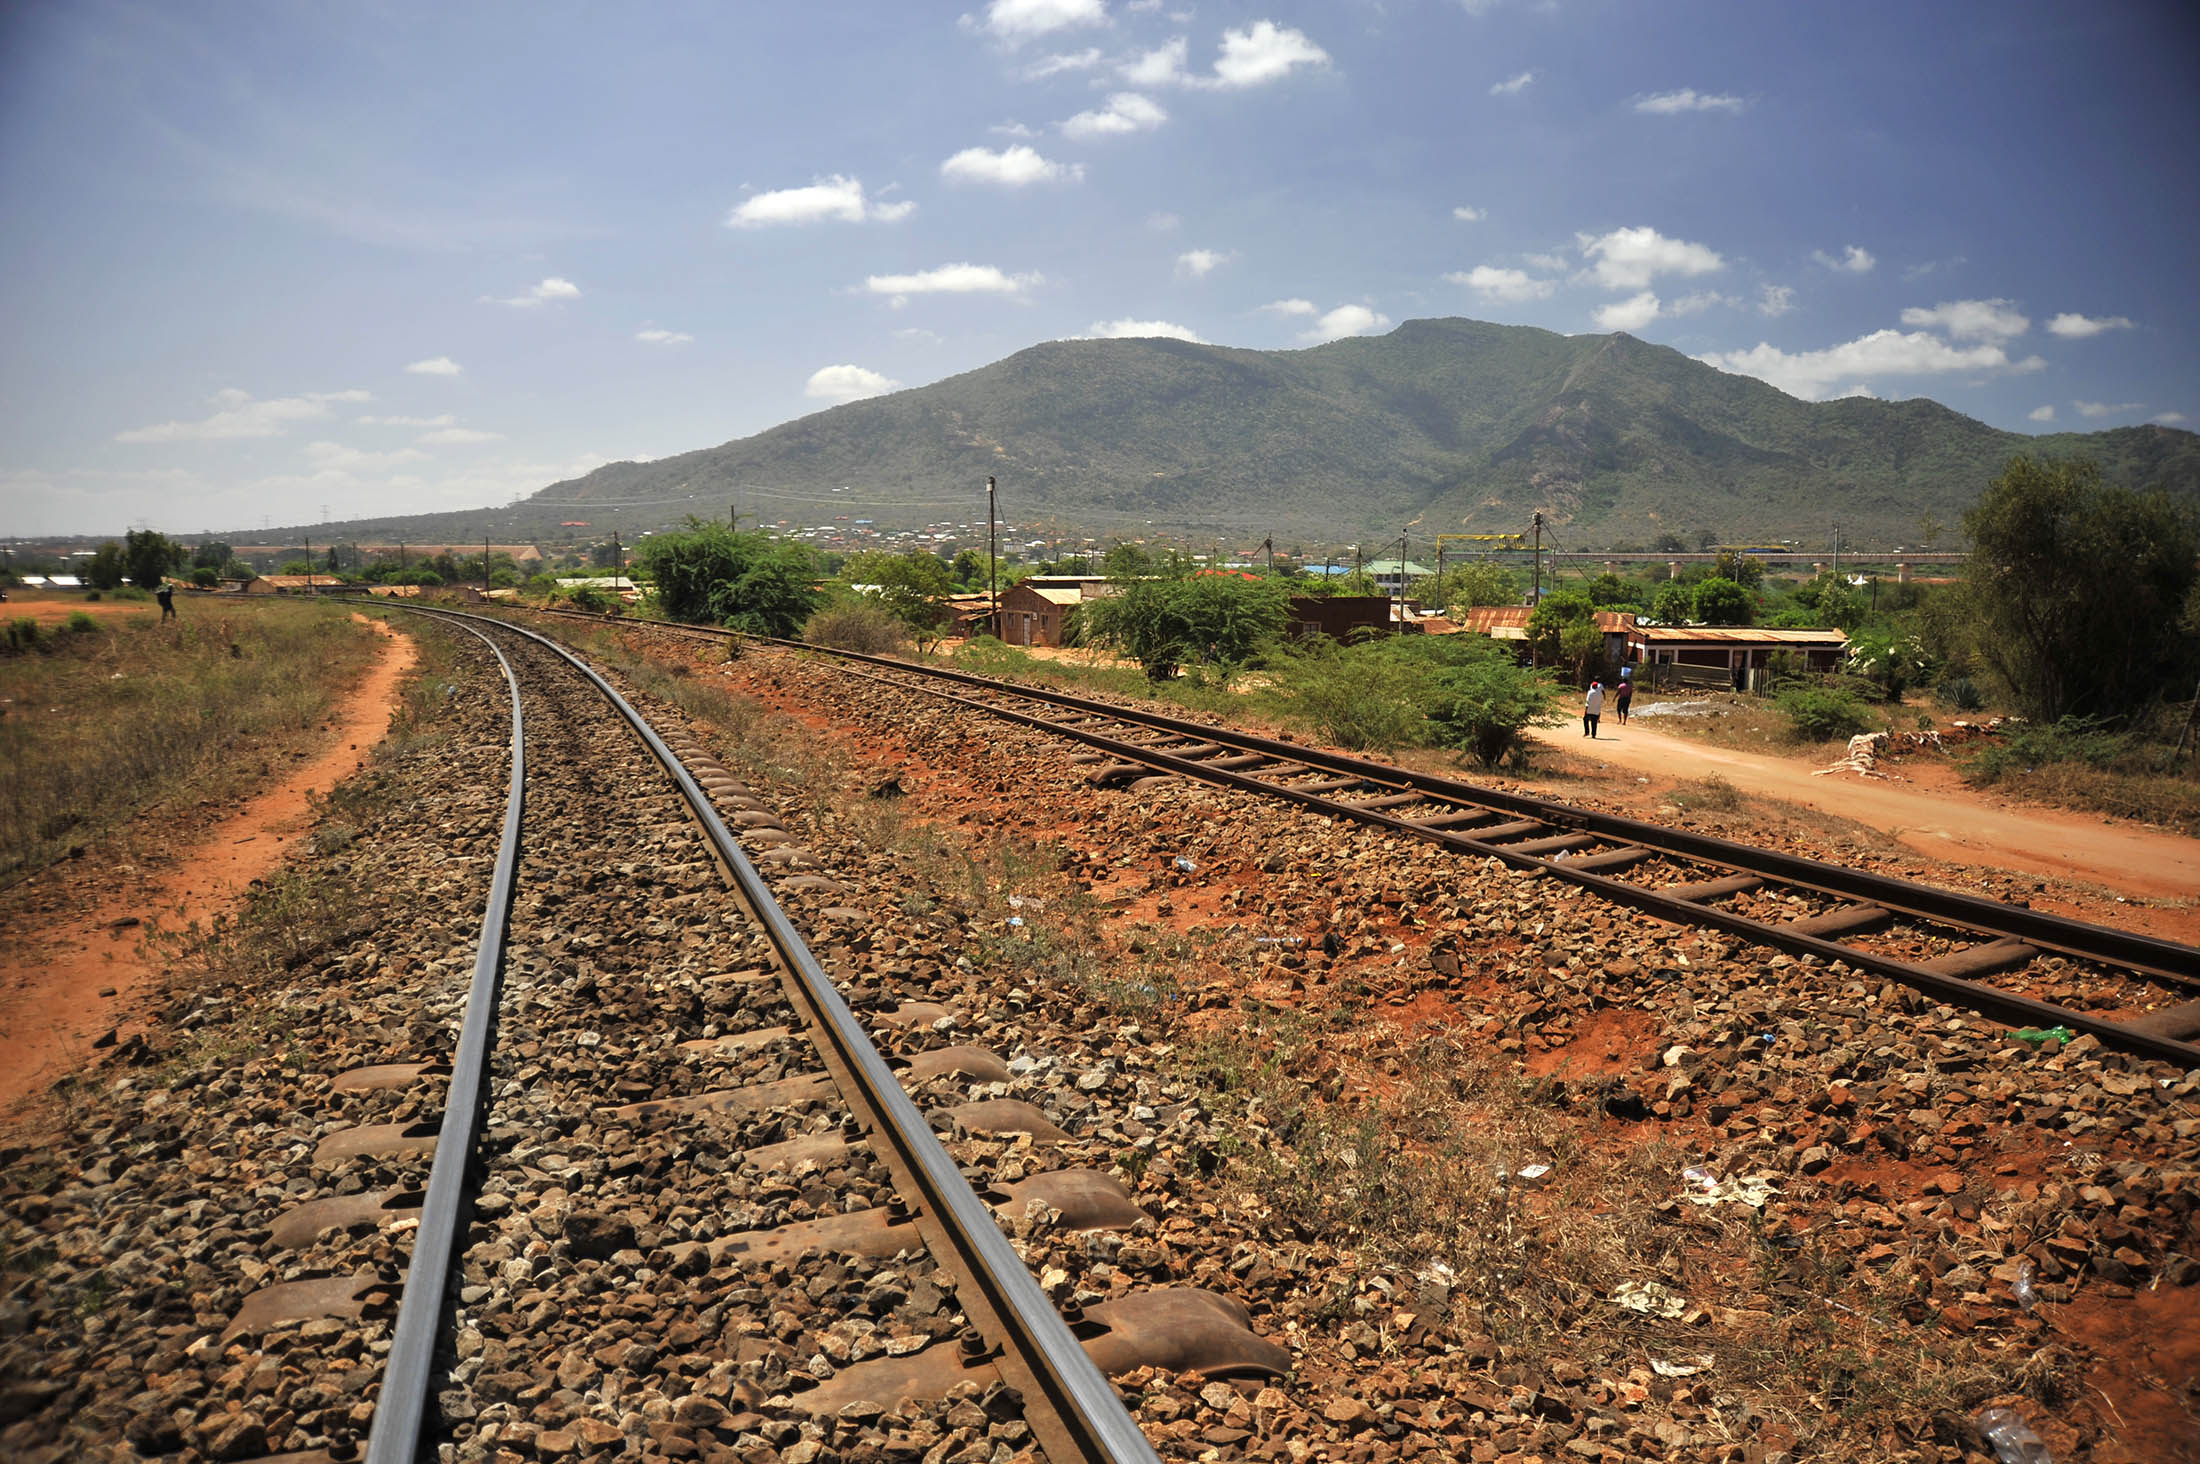 An old colonial-era railway line sits near the site of the new Mombasa-Nairobi Standard Gauge Railway (SGR) line under construction in Voi, Kenya, on Wednesday, March 16, 2016. By providing an alternative to roads, the 1,100-kilometer (684-mile) Chinese-financed railway will slash the time and cost of transporting people and goods between East Africa's landlocked nations. Photographer: Riccardo Gangale/Bloomberg